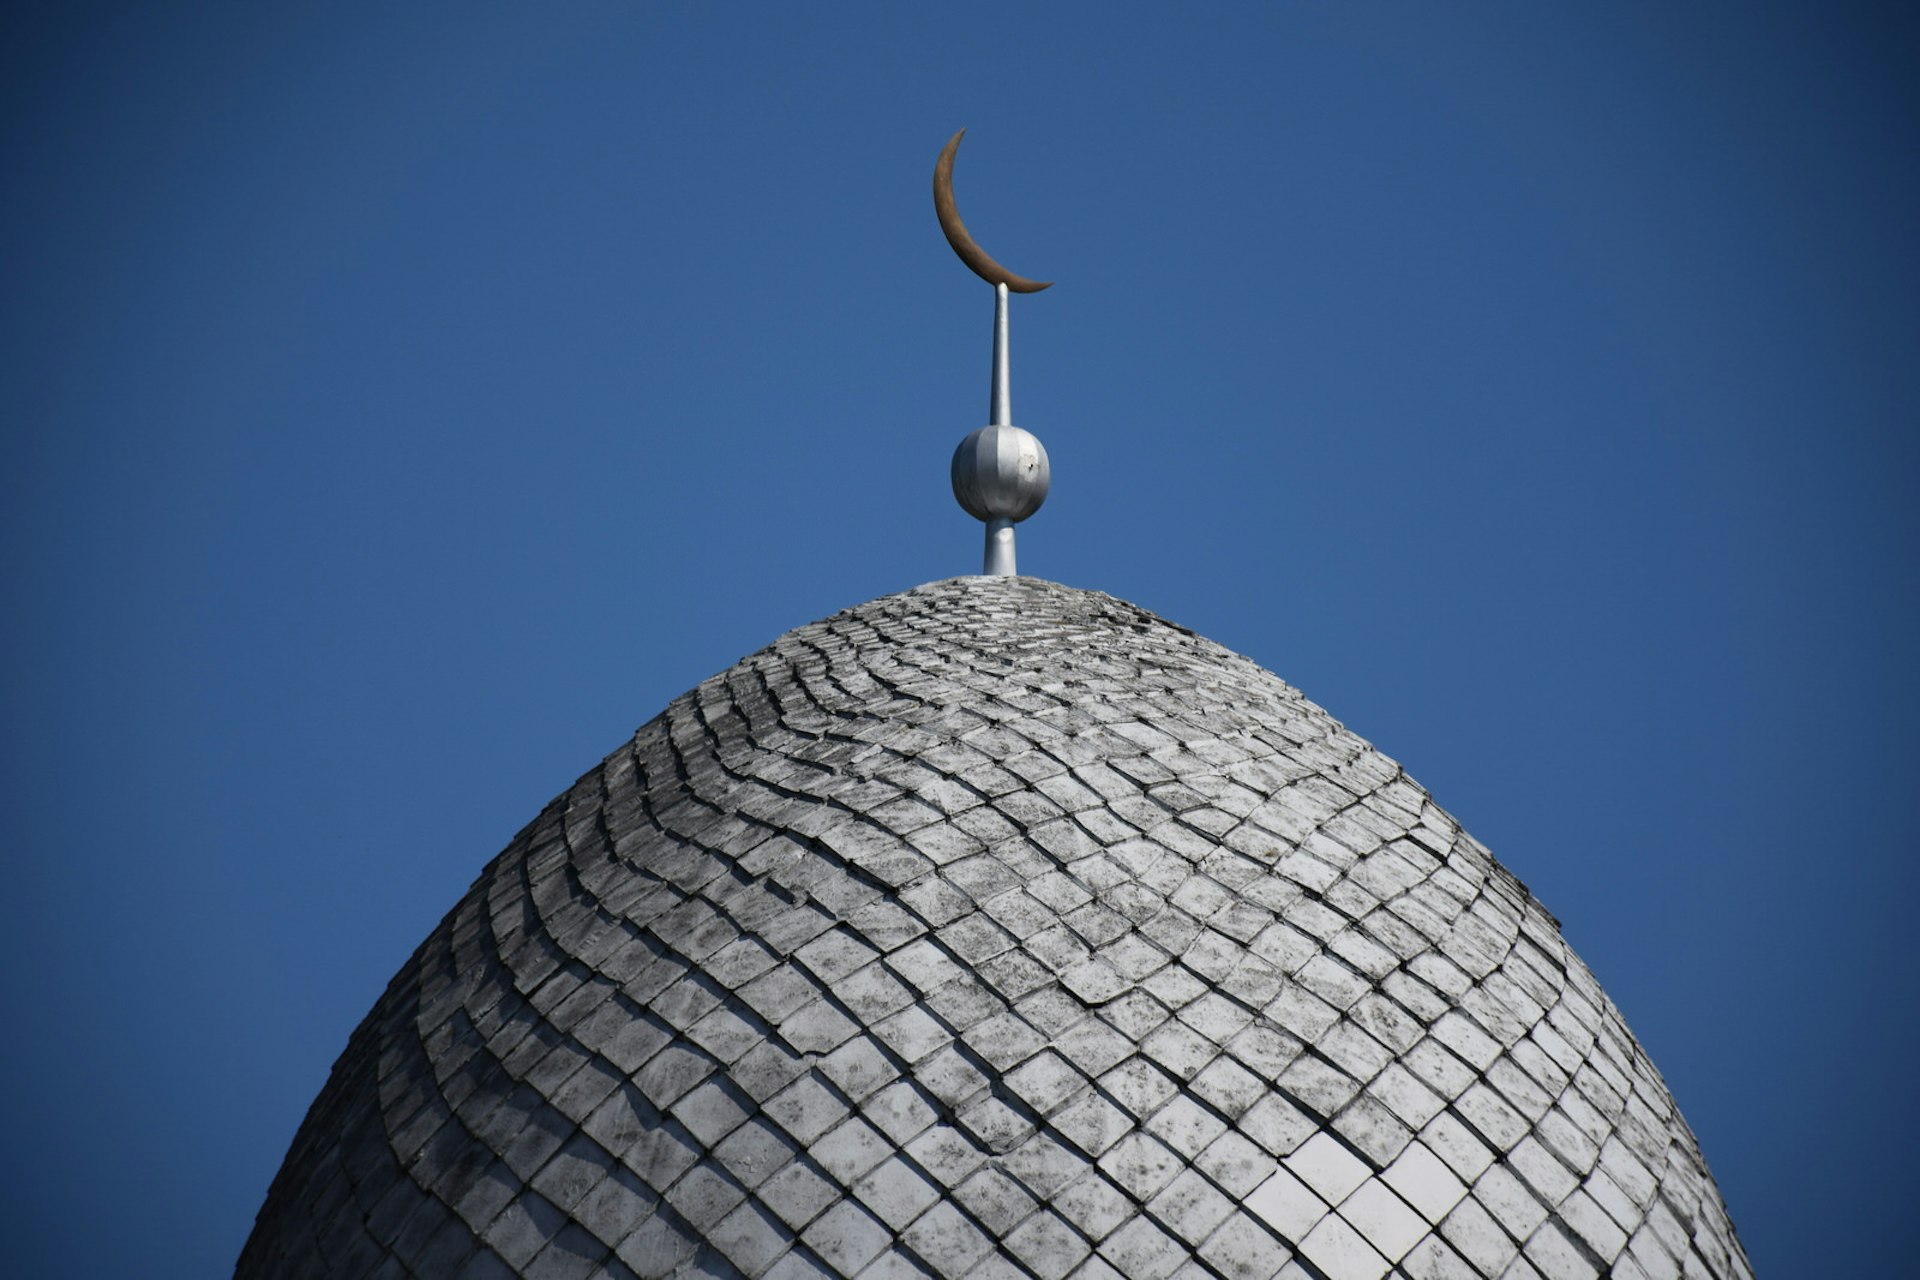 Detail of the tiling on Kaunas Mosque's dome, topped with a crescent